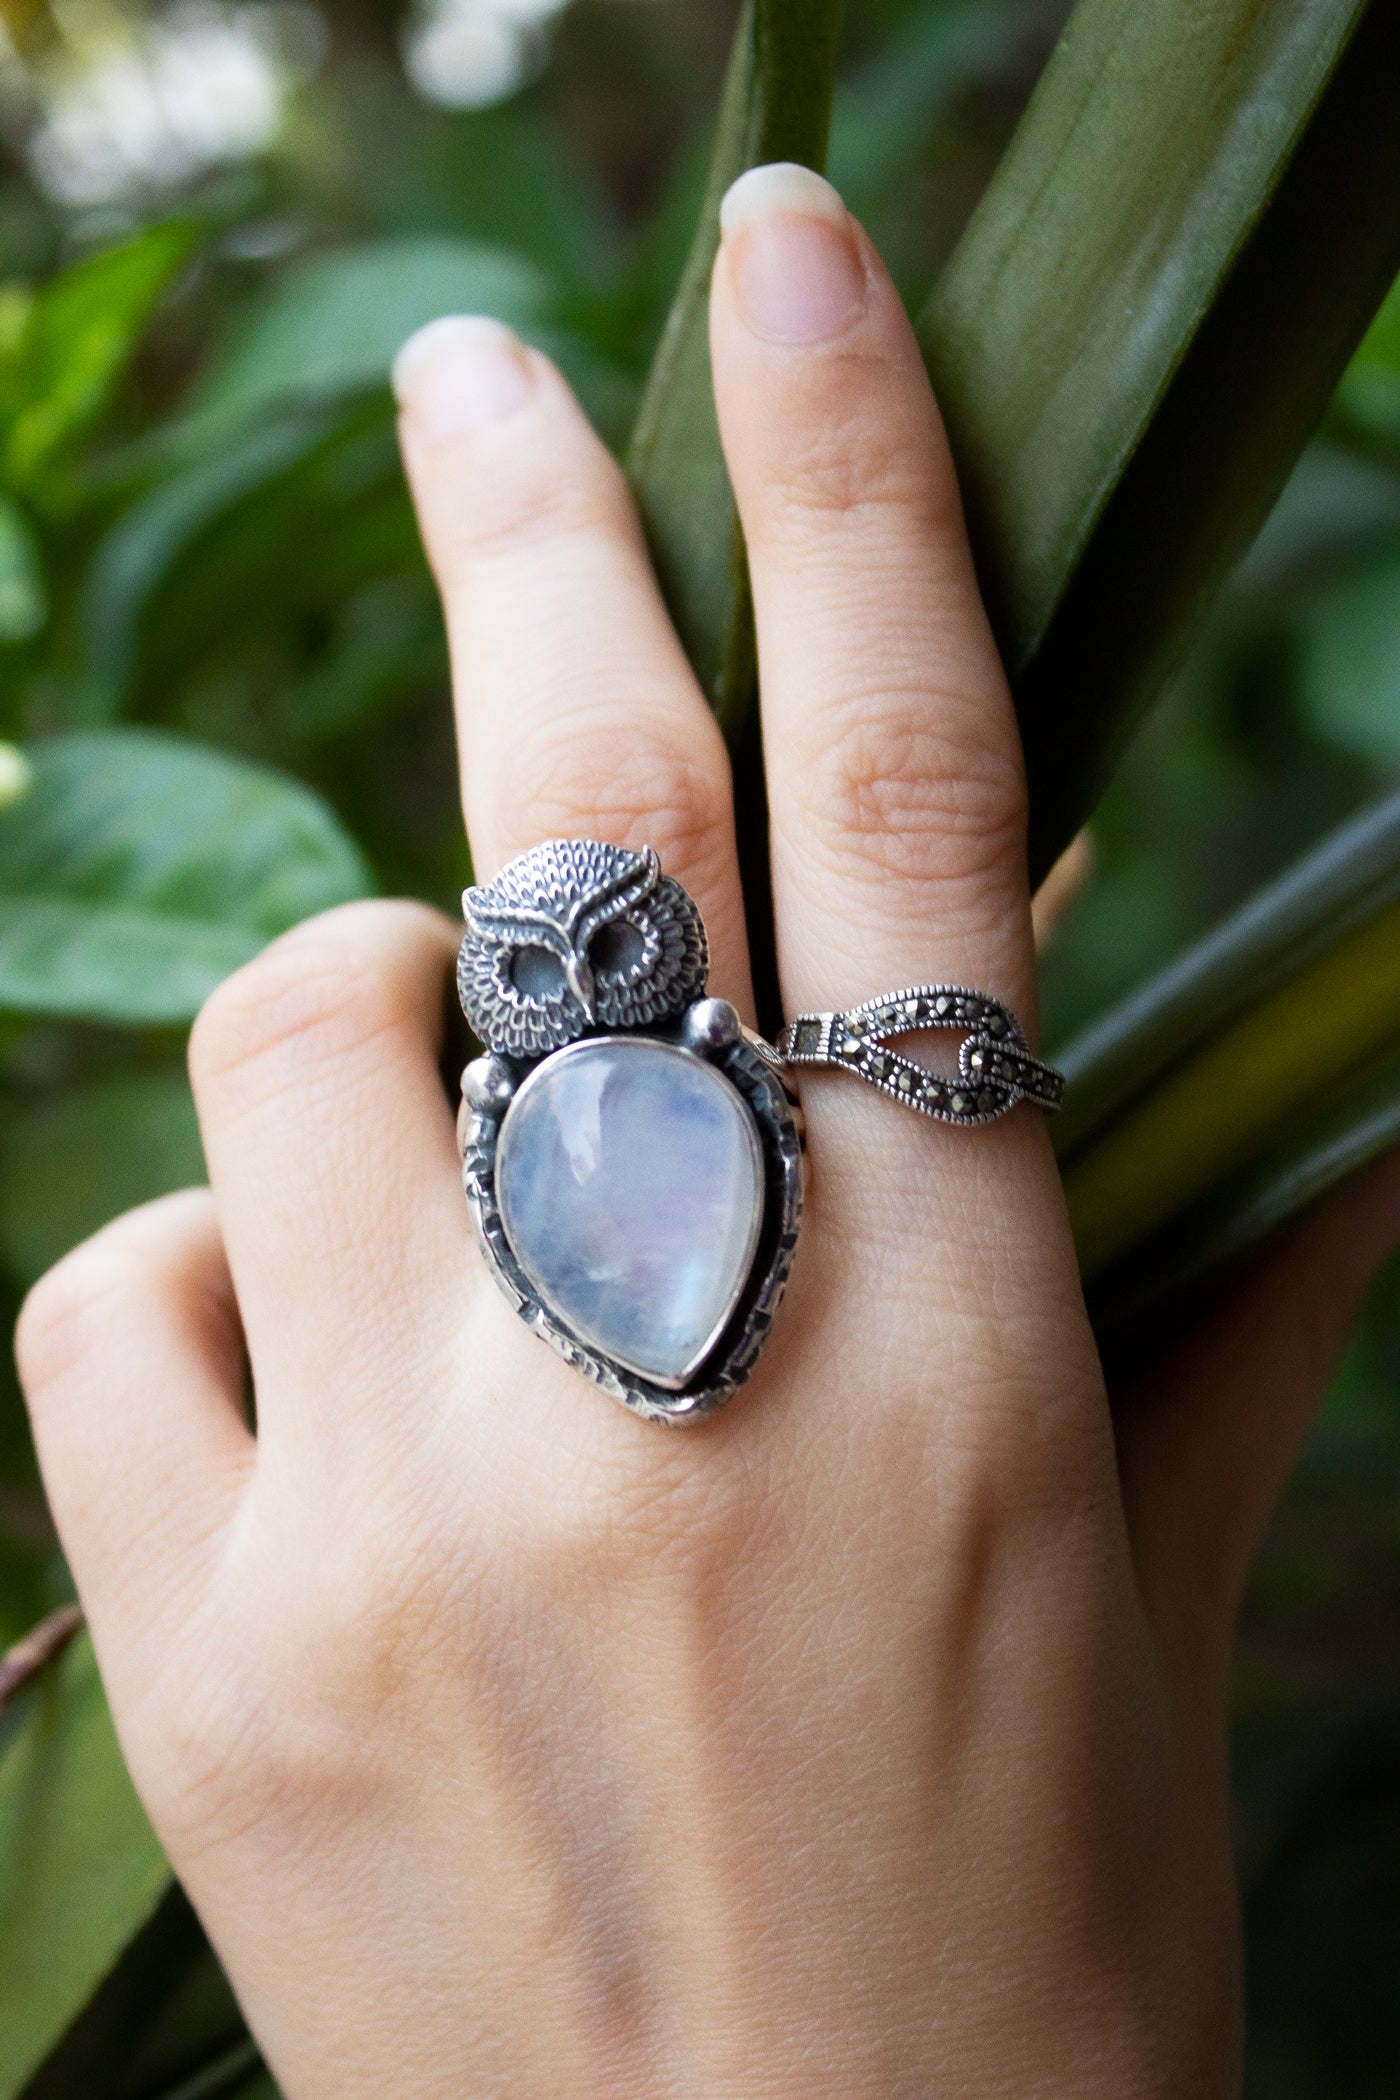 Moonstone Ring with Owl Sterling Silver Ring, AR-6677 – Its Ambra